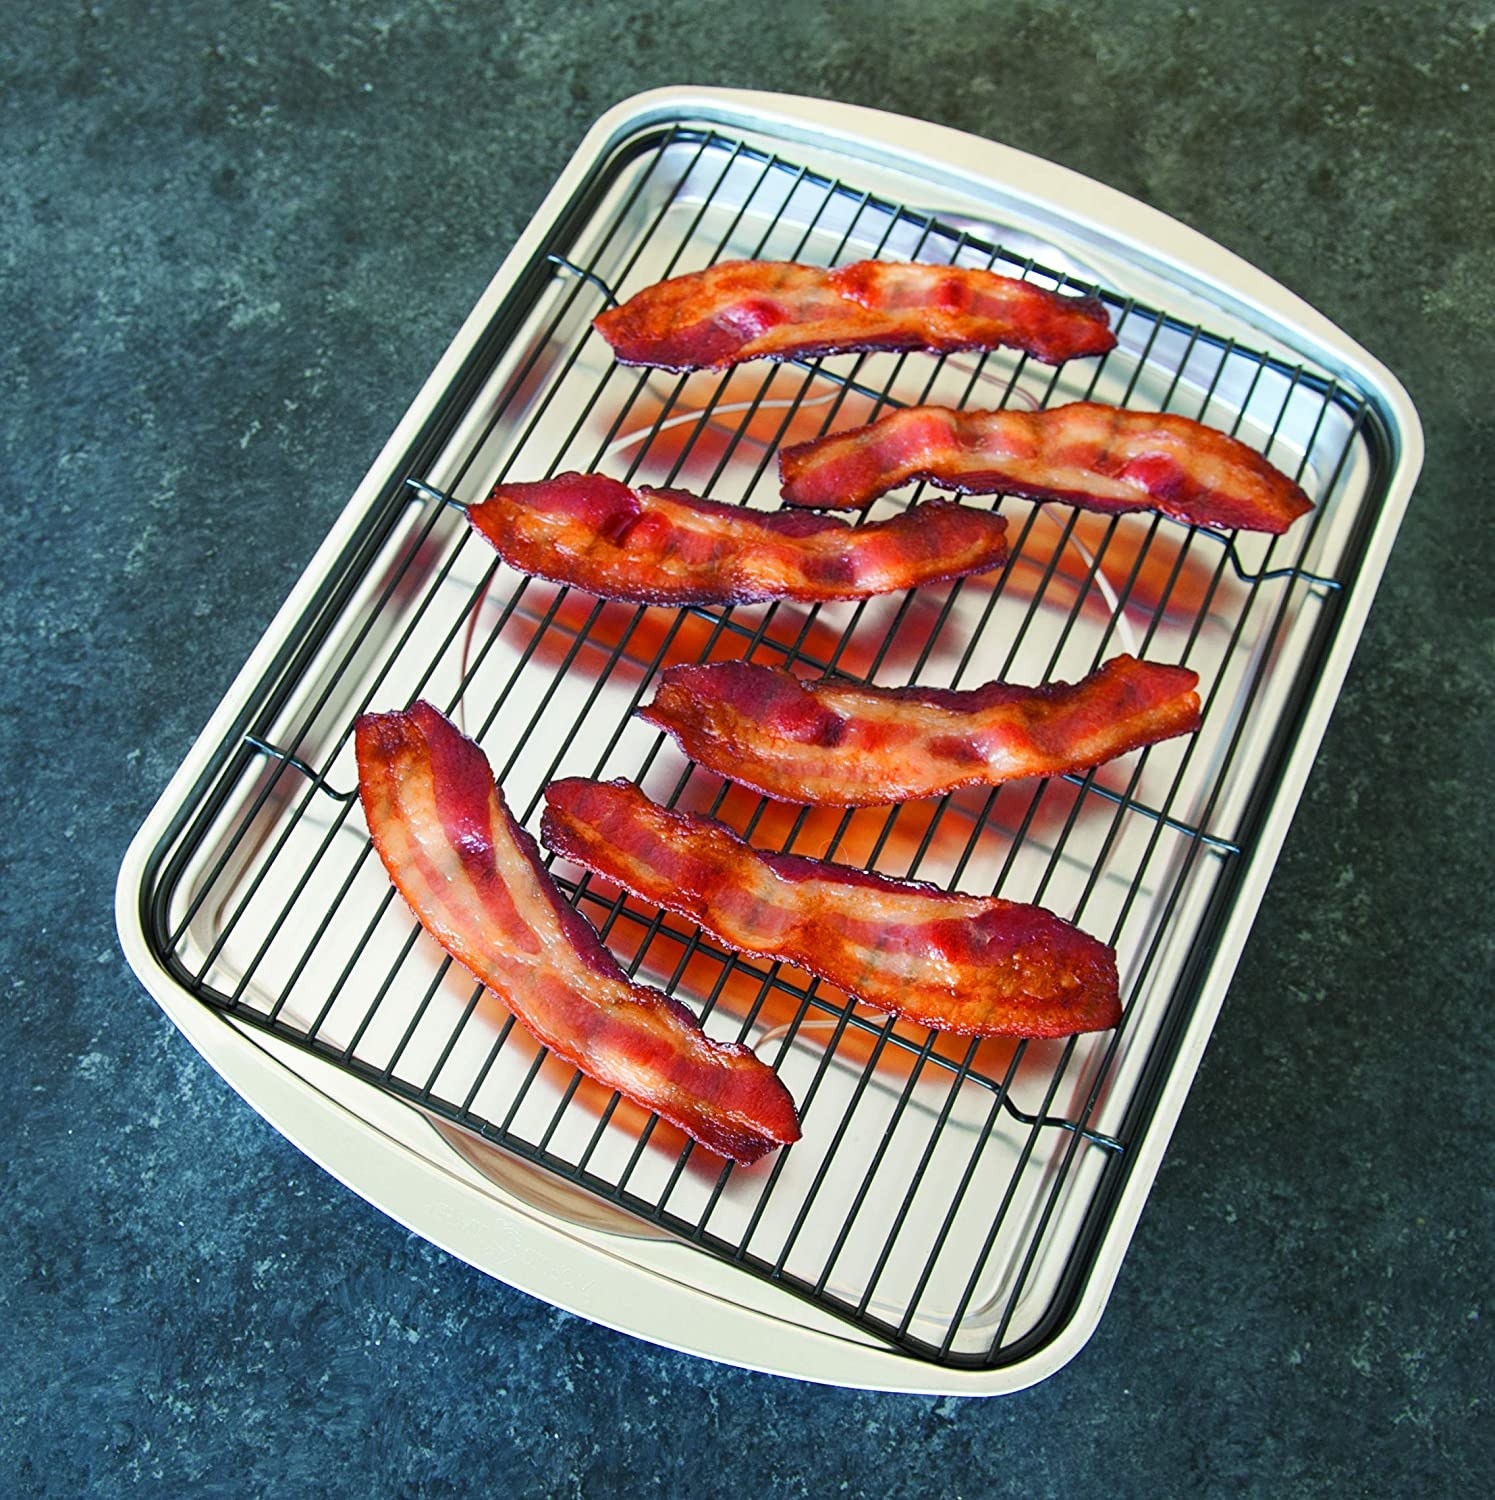 Several strips of bacon on the bacon pan